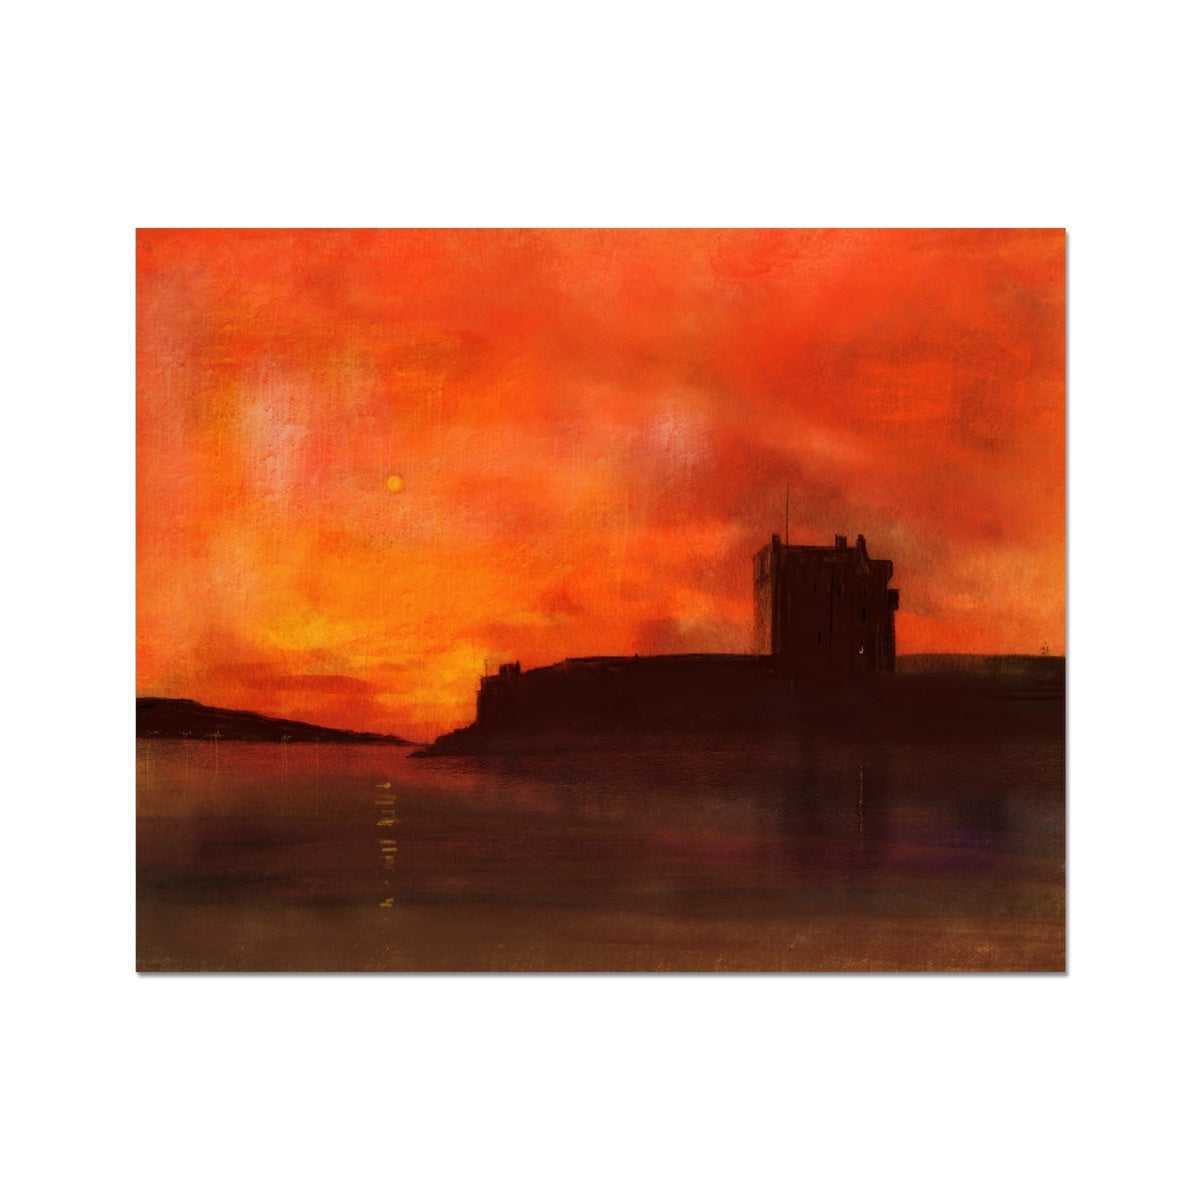 Broughty Castle Sunset Painting | Artist Proof Collector Prints From Scotland-Artist Proof Collector Prints-Historic & Iconic Scotland Art Gallery-20"x16"-Paintings, Prints, Homeware, Art Gifts From Scotland By Scottish Artist Kevin Hunter